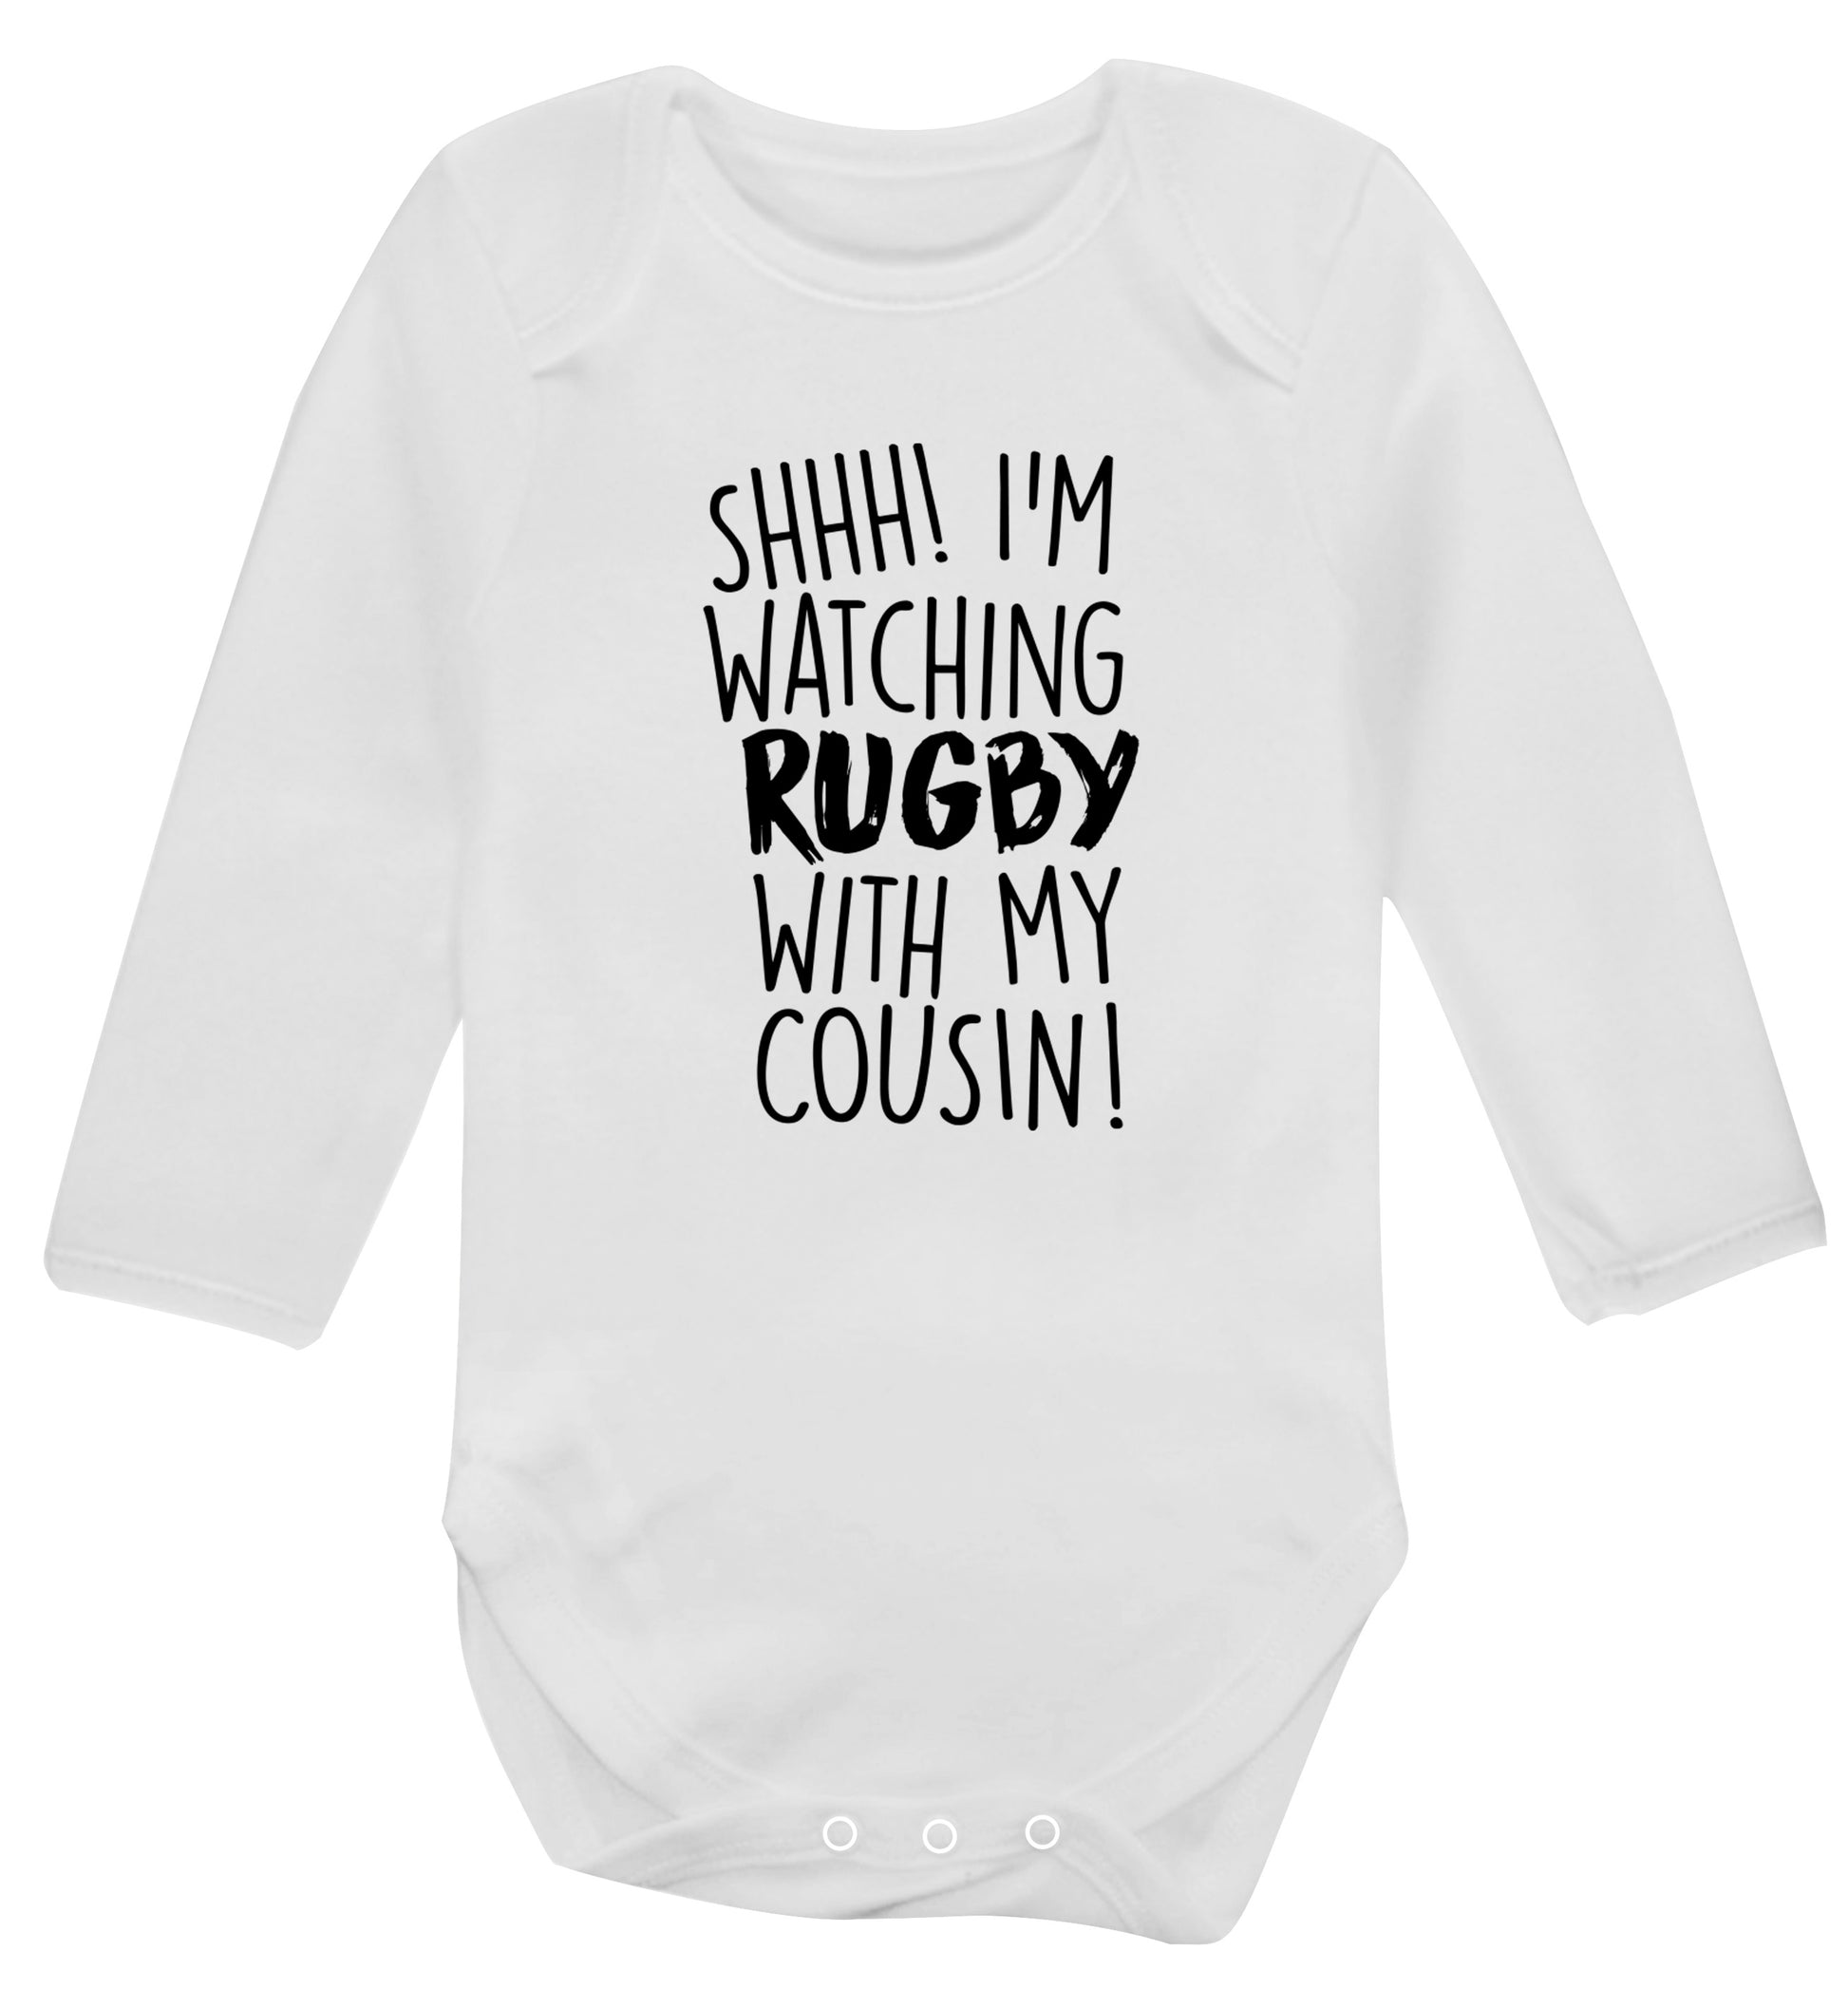 Shhh I'm watching rugby with my cousin Baby Vest long sleeved white 6-12 months